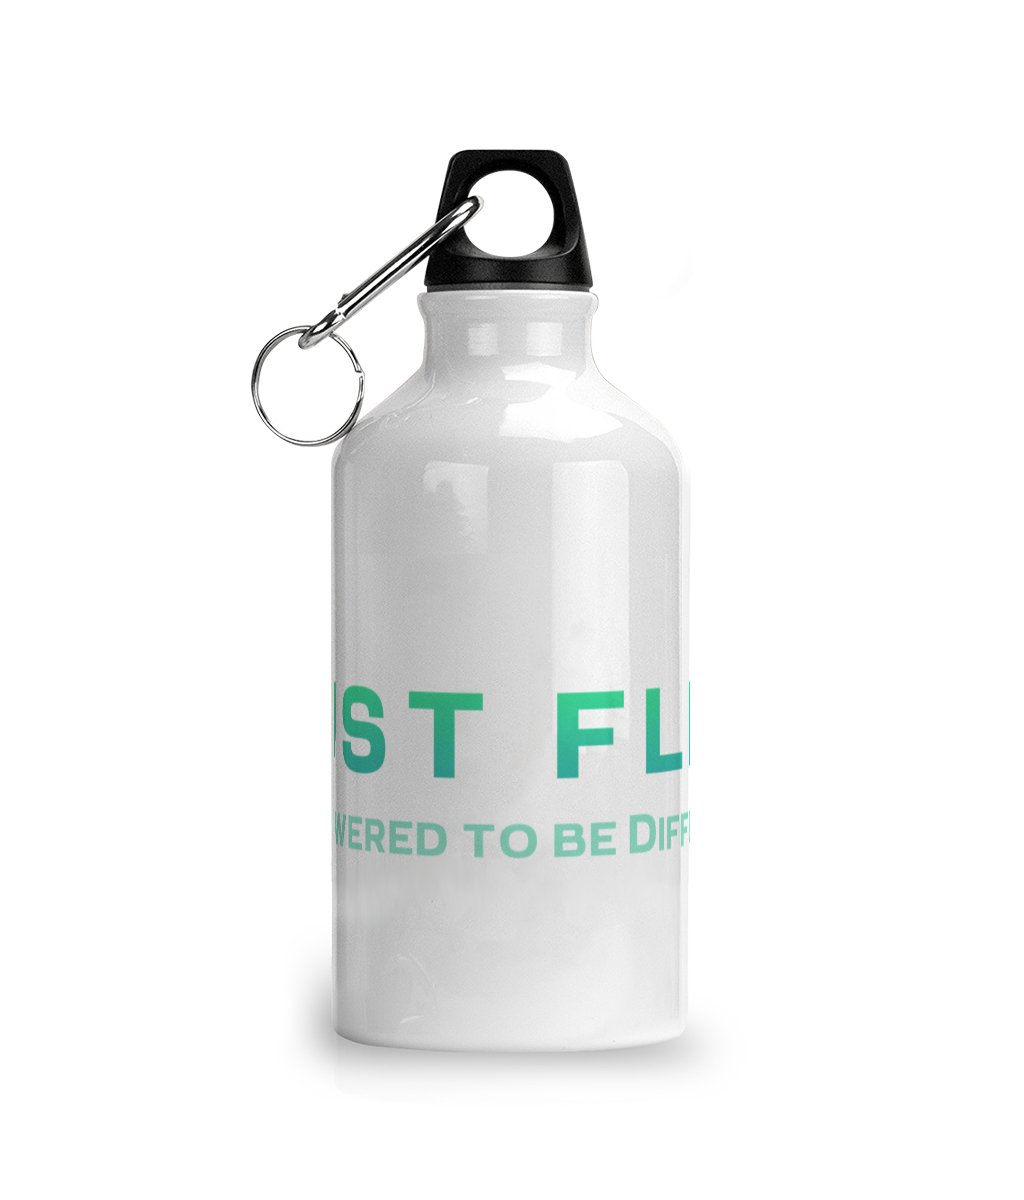 Just Flex - Empowered To Be Different Aluminium Sports Water Bottle